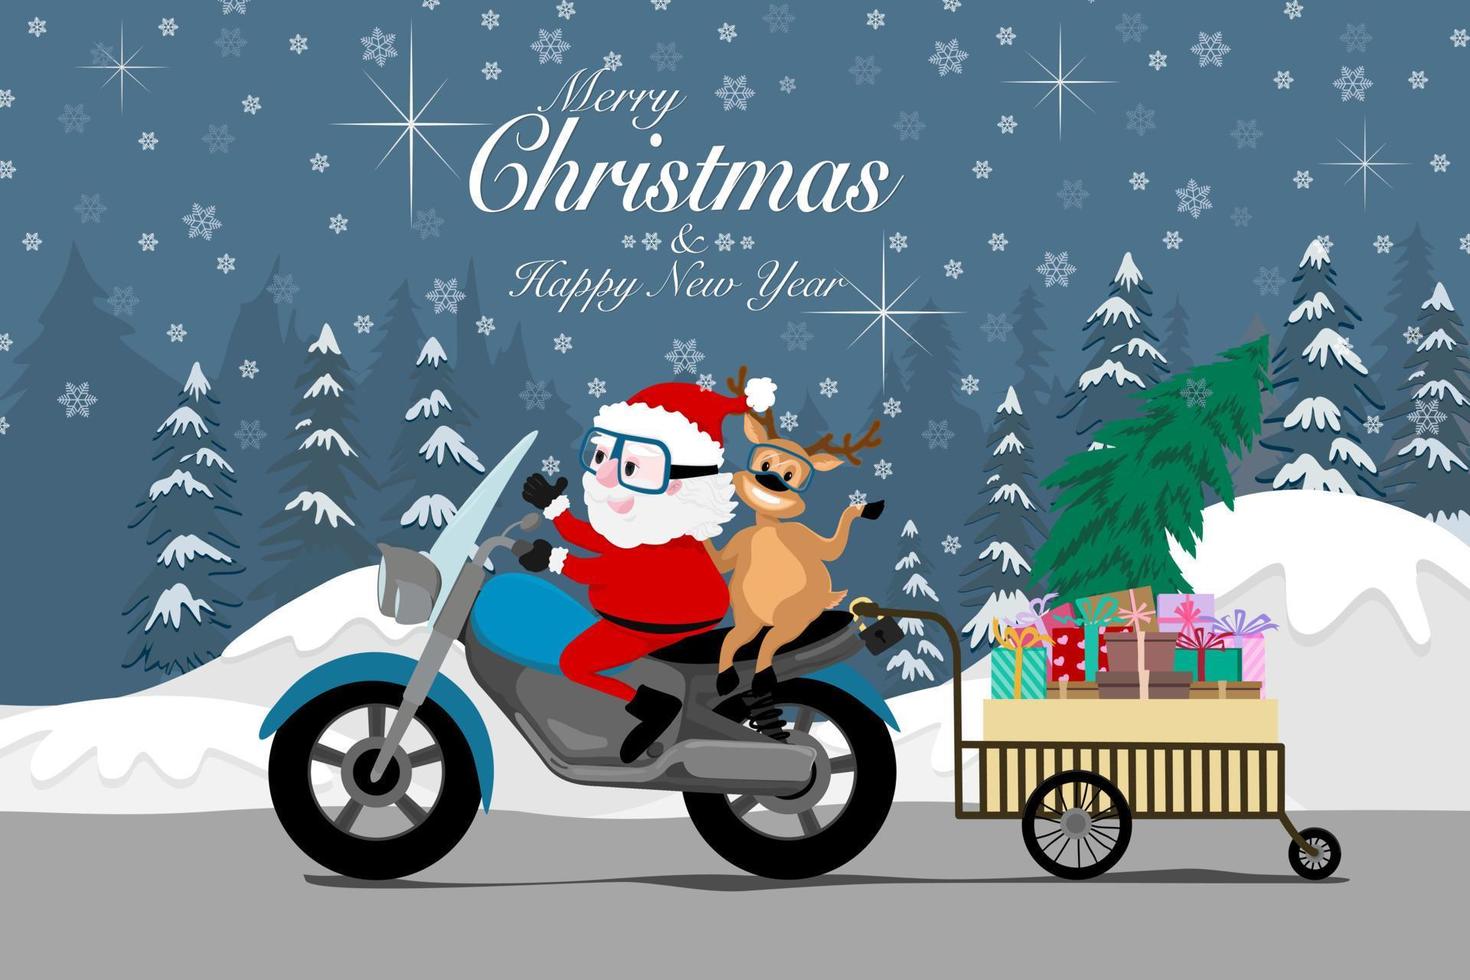 Vector Merry Christmas and happy new year greeting card, drawing of Santa Claus and reindeer riding motorcycle delivery gifts in a cart on road, frozen pine trees and snowflakes on background